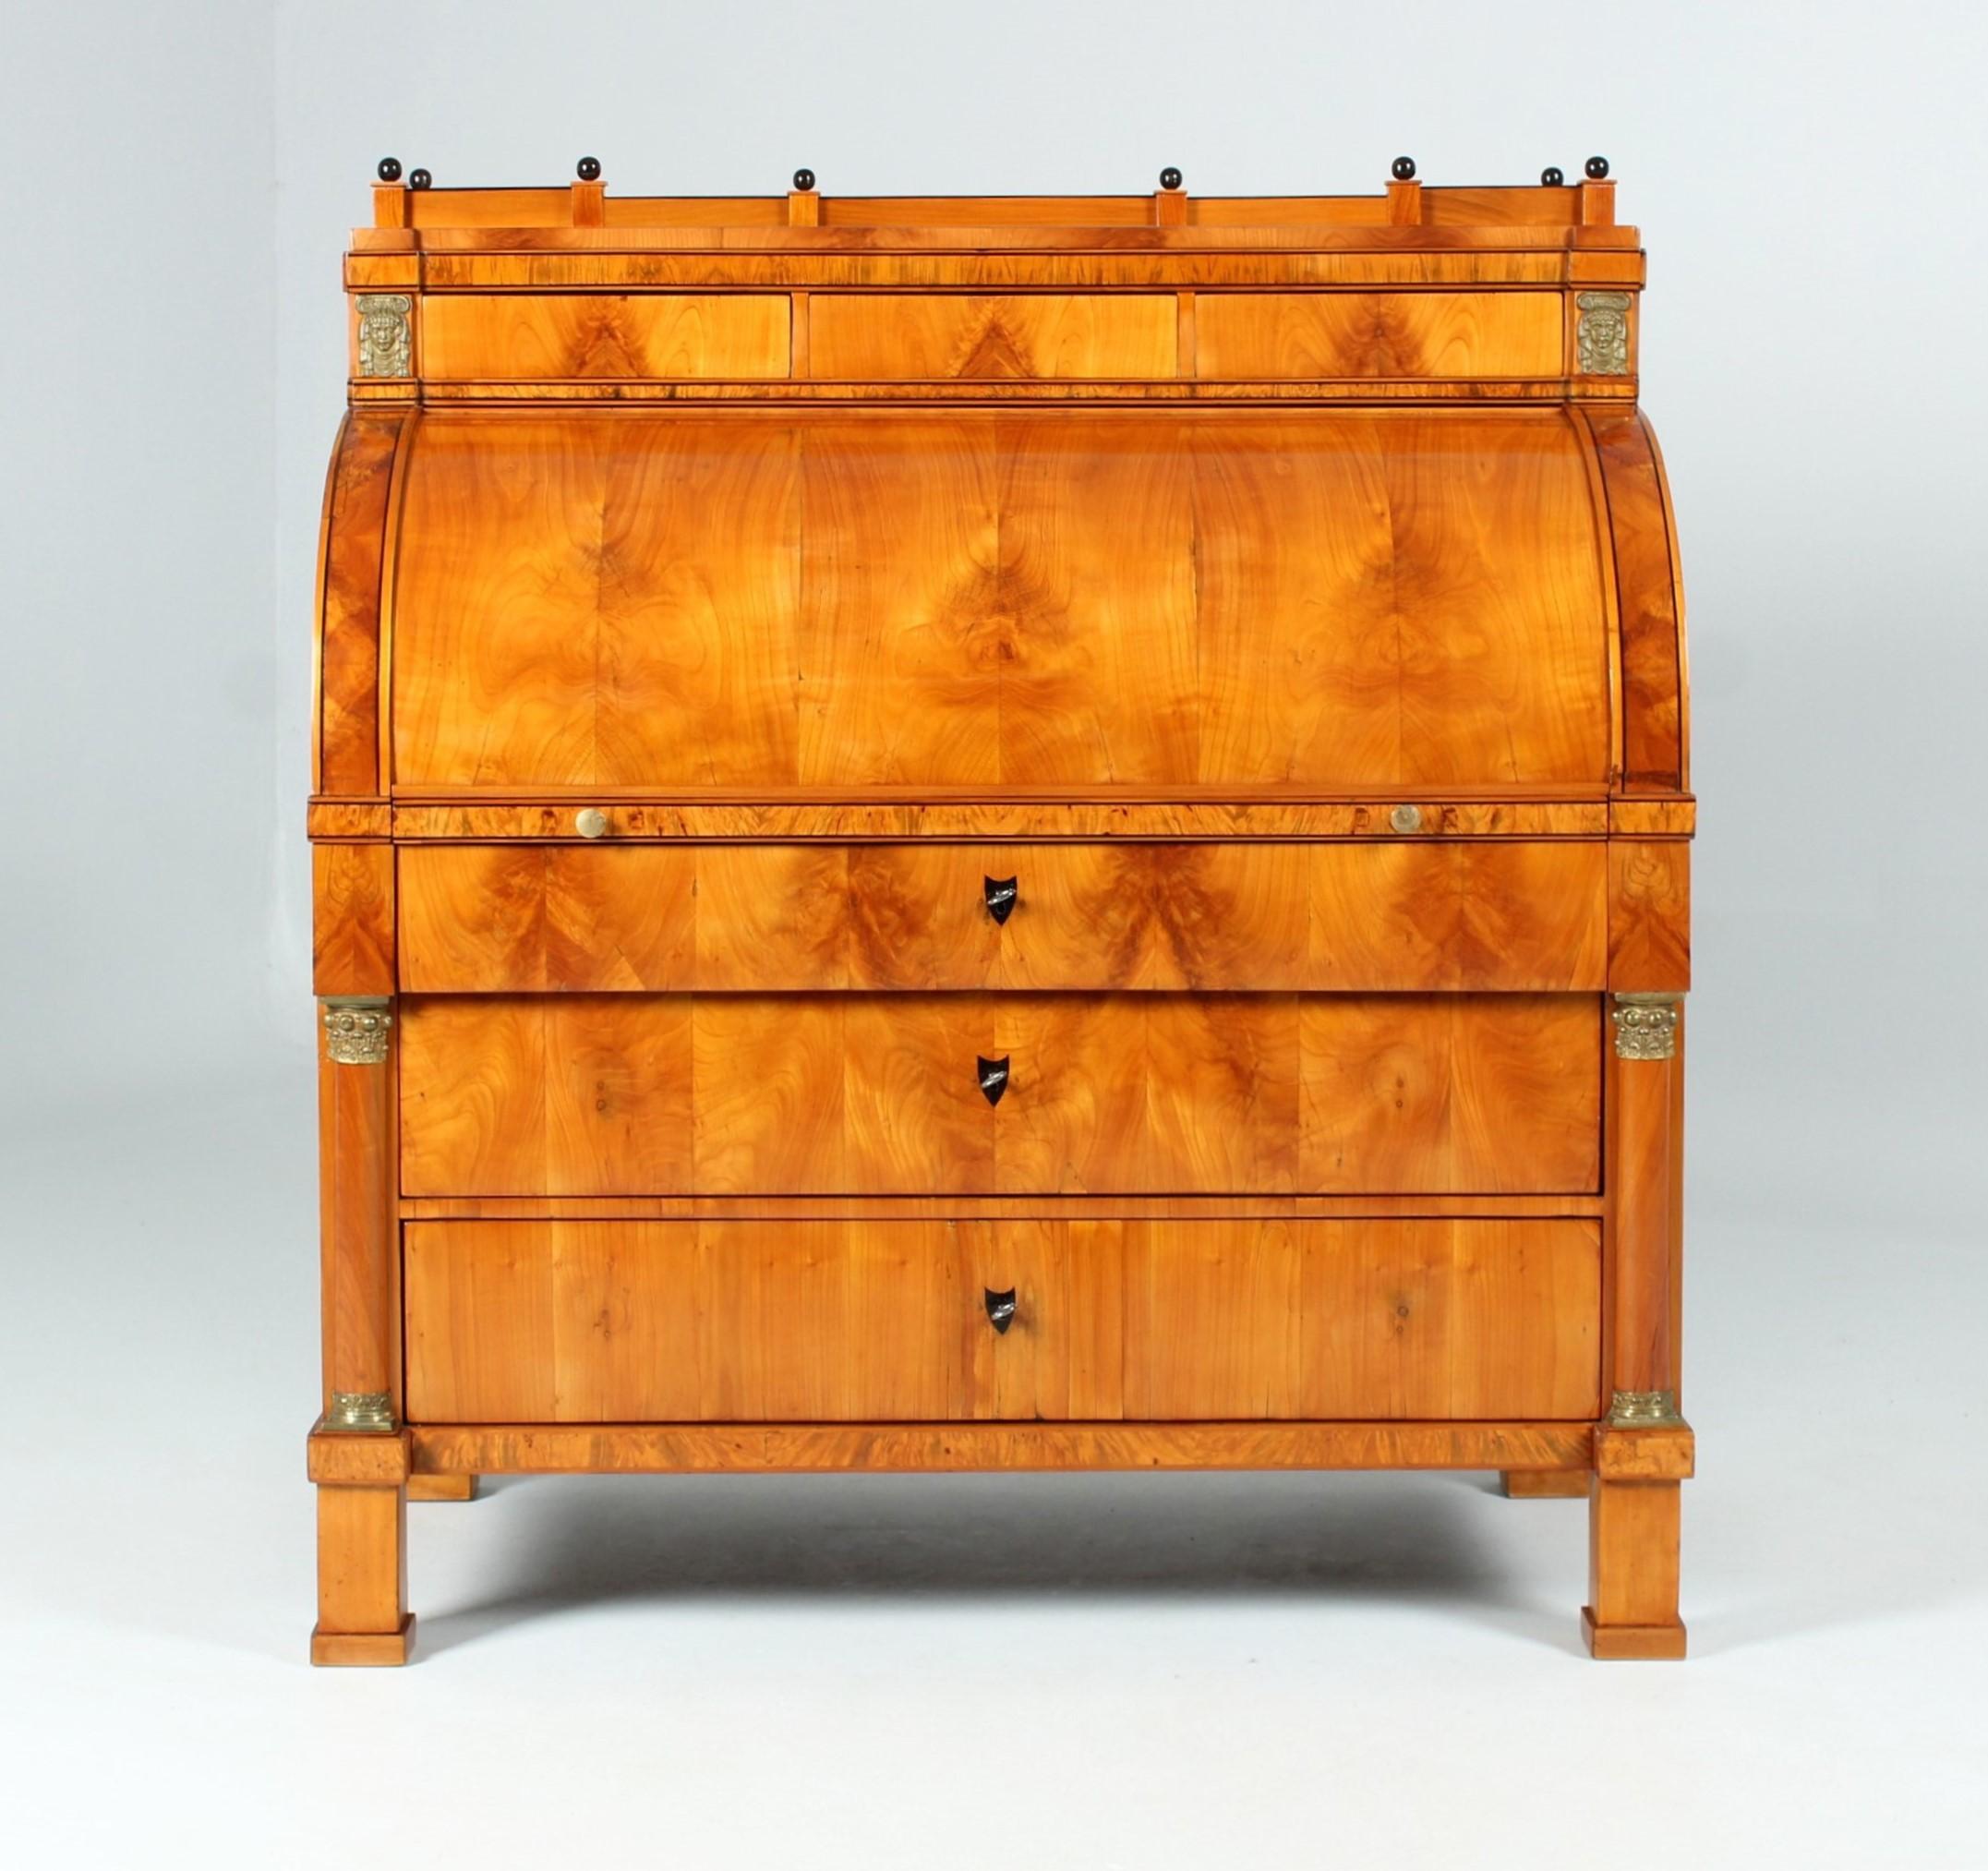 Biedermeier secretary in cherry wood

Mainz
Cherry tree
Biedermeier around 1815

Dimensions: H x W x D: 125 x 113 x 62 cm

Description:
Writing desk standing on square feet with a clean, continuous cherry veneer pattern.

The base of the piece of